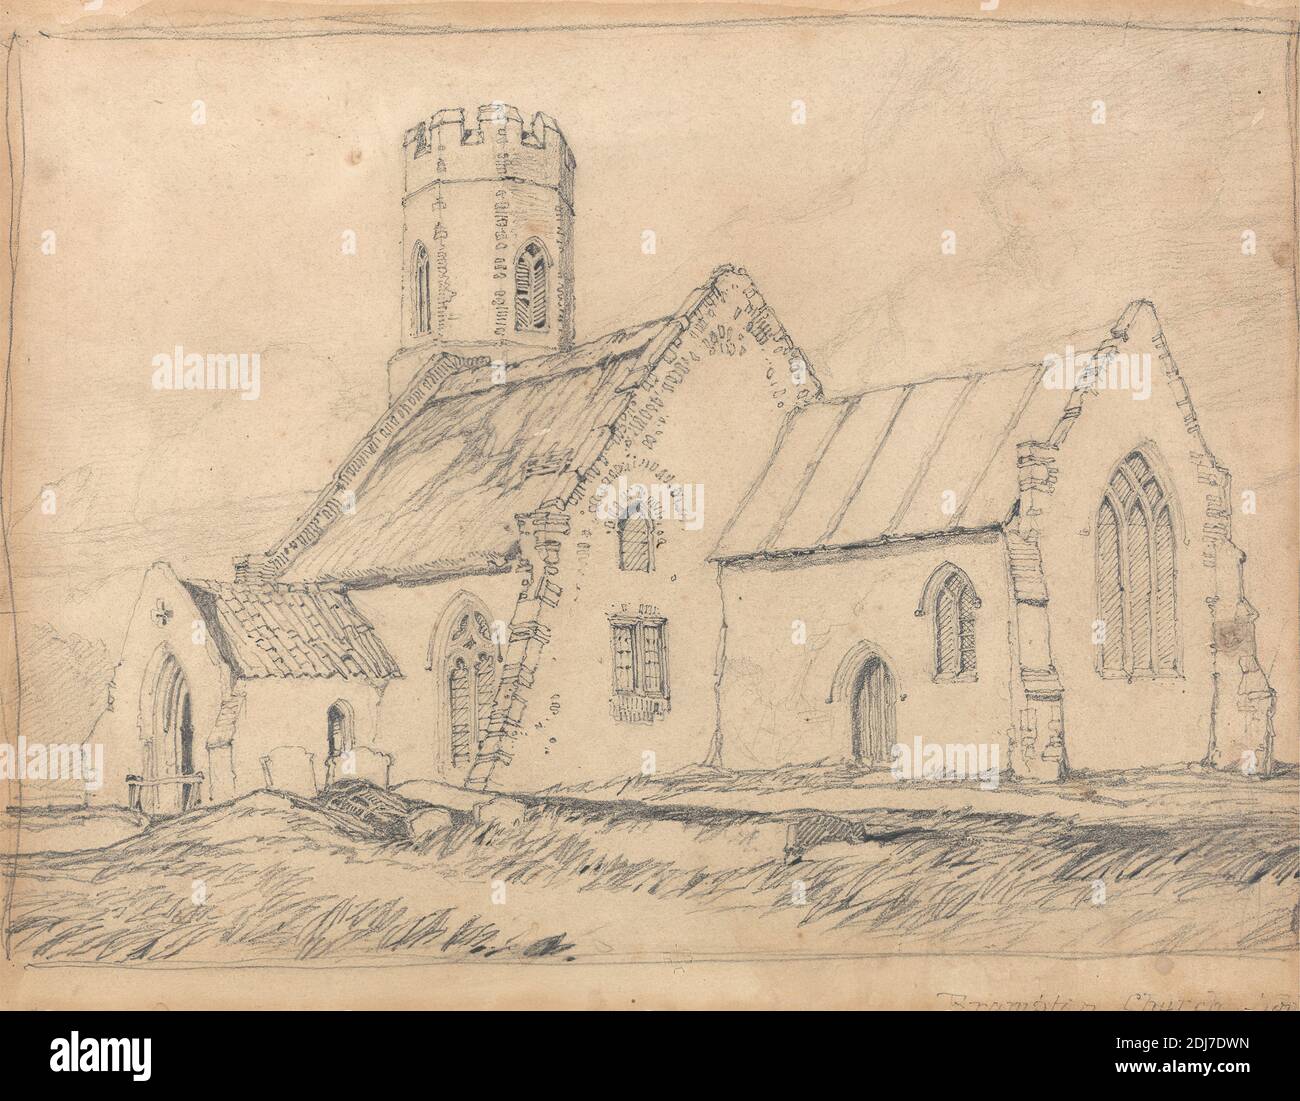 Brampton Church, Norfolk, from the South-East, John Sell Cotman, 1782–1842, British, ca. 1816, Graphite on medium, slightly textured, cream wove paper, Sheet: 8 3/4 x 11 3/8 inches (22.2 x 28.9 cm) and Contemporary drawn border: 10 3/8 x 12 1/4 inches (26.4 x 31.1 cm), architectural subject, church, round tower, Brampton, Brampton church, England, Norfolk, United Kingdom Stock Photo